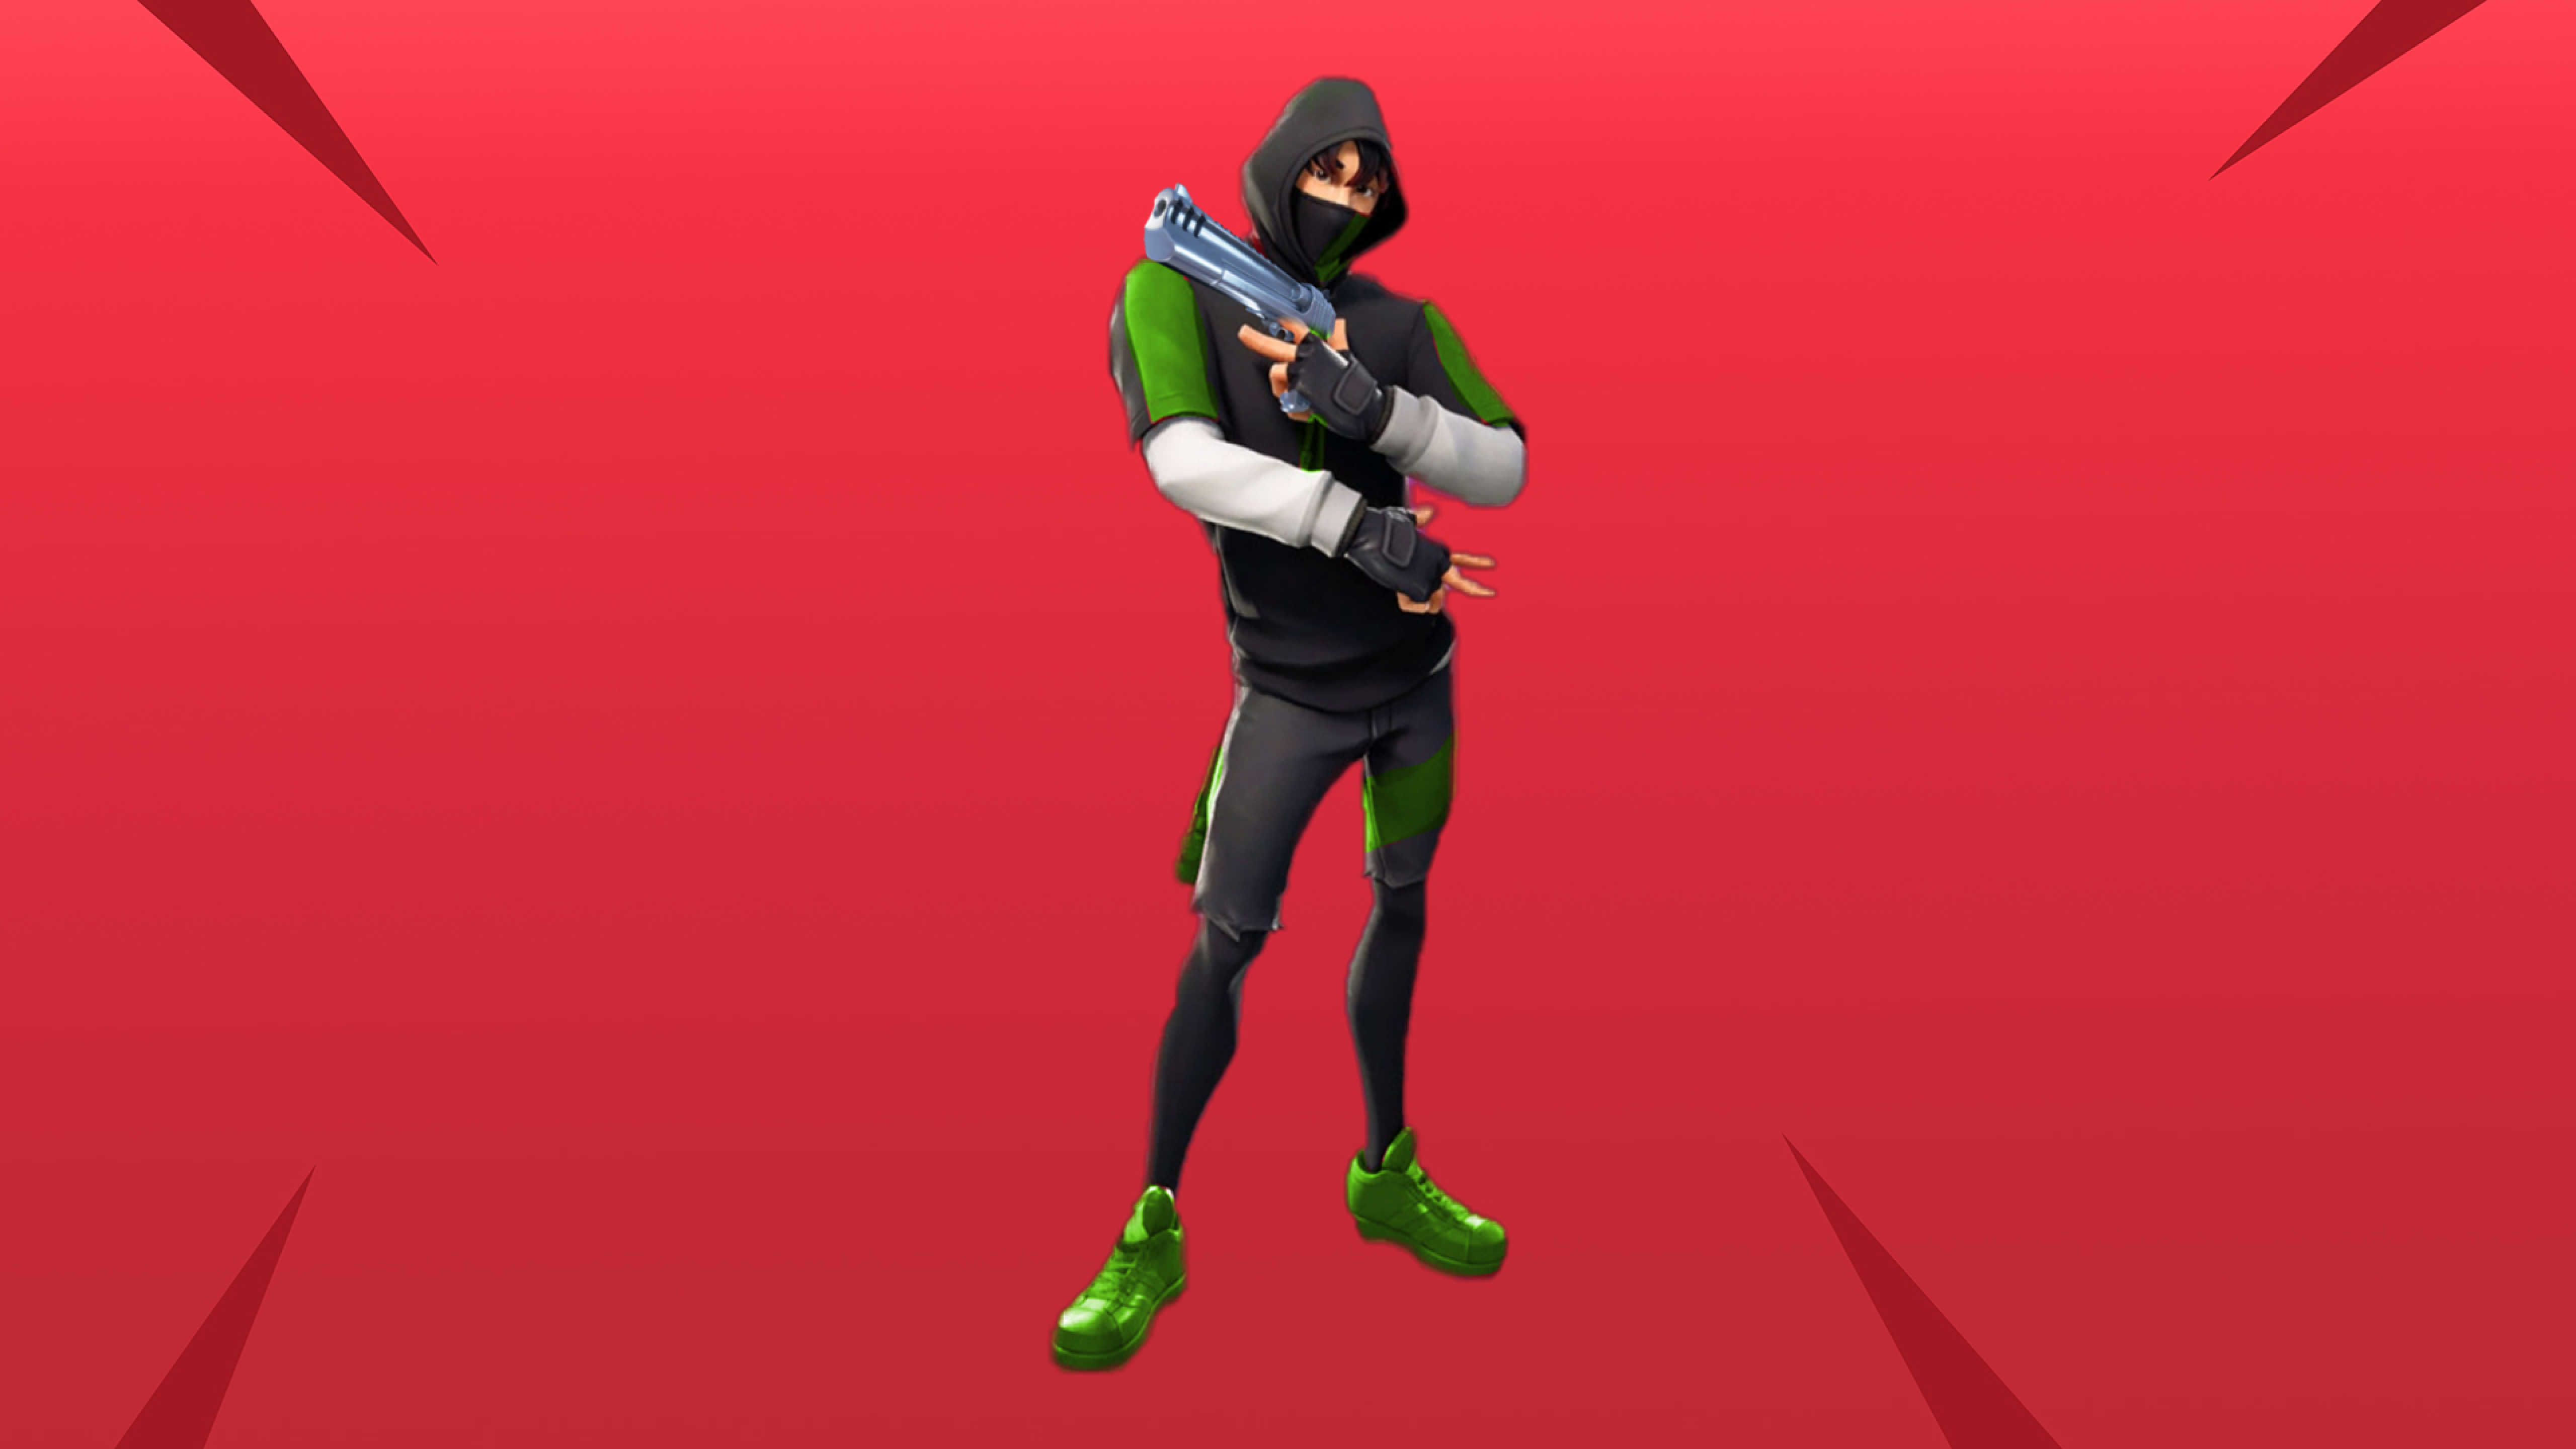 51x Ikonik Fortnite 5k Wallpaper Hd Games 4k Wallpapers Images Photos And Background